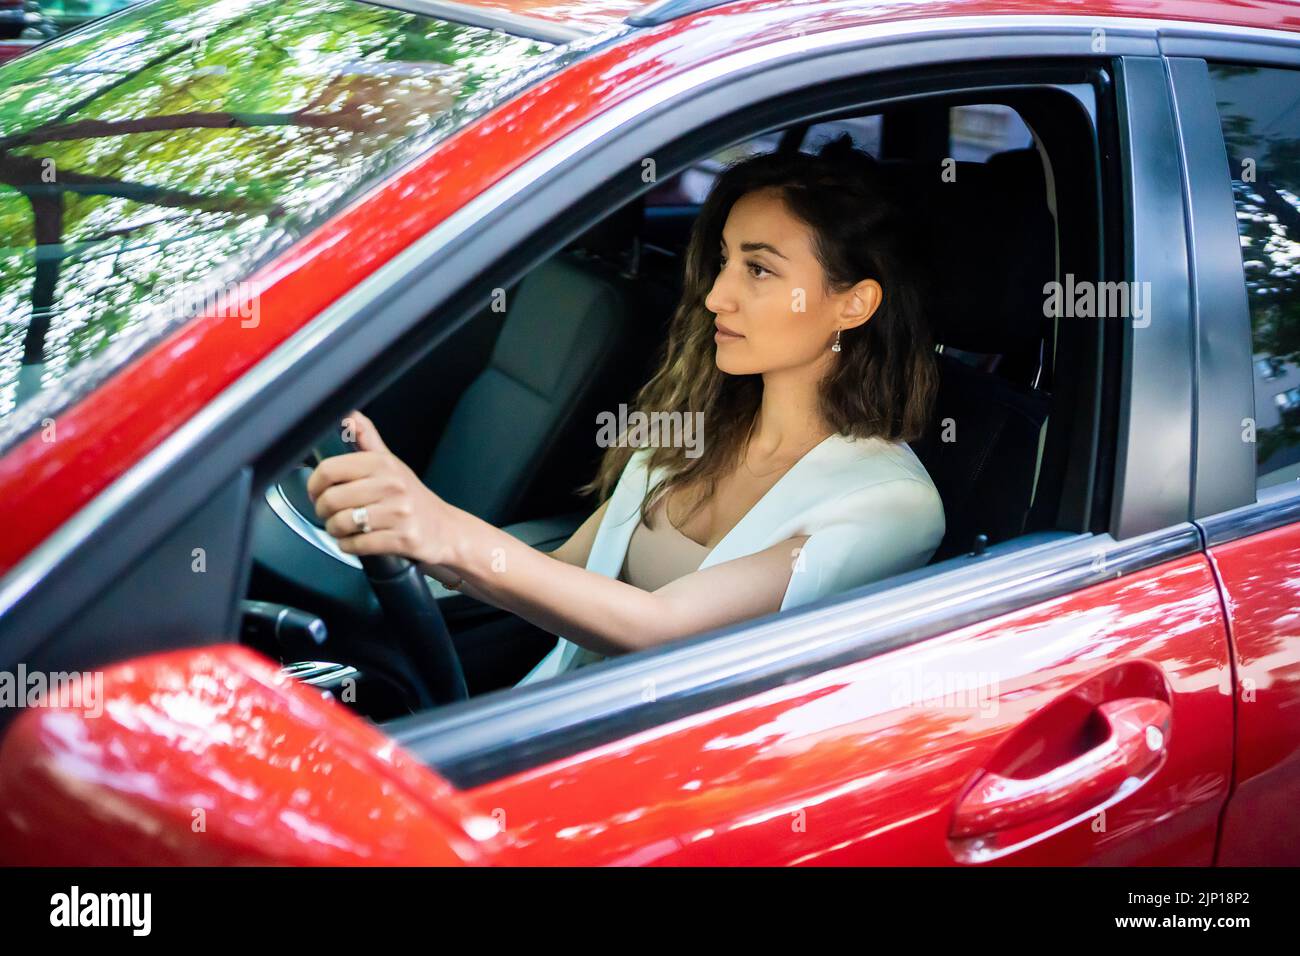 Happy smiling woman driver behind the wheel red car. View through car window Stock Photo